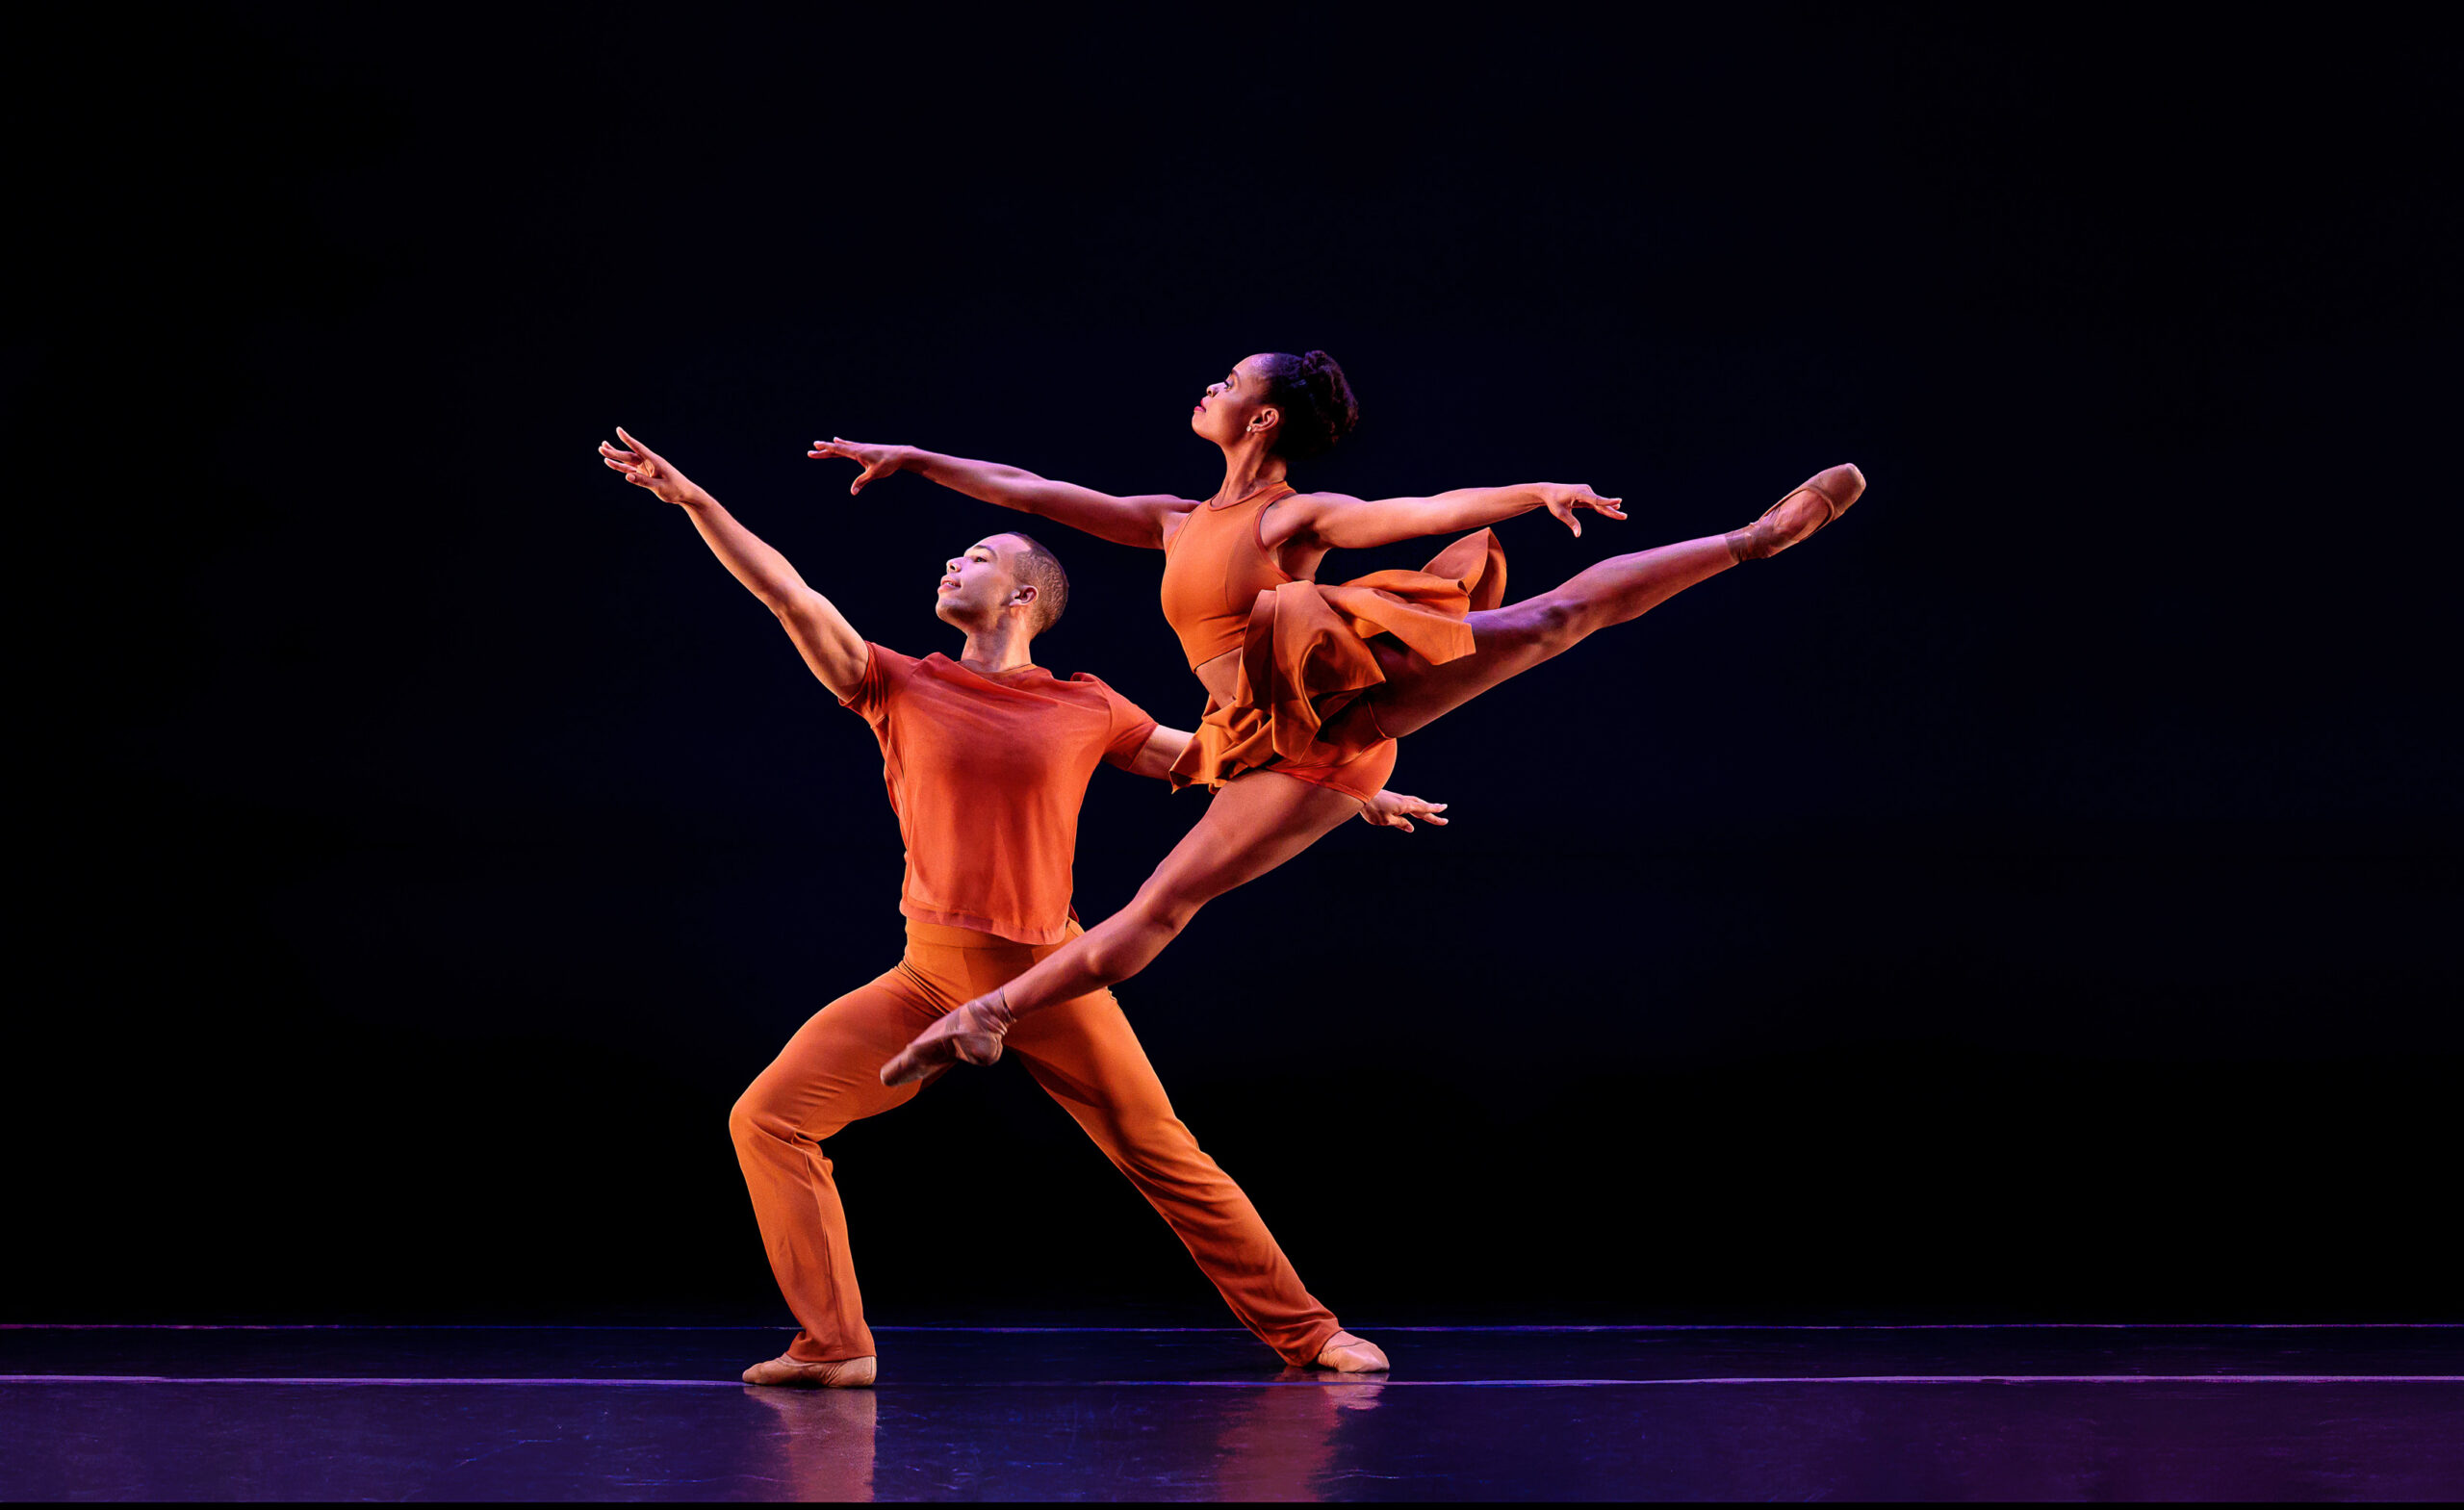 On a dark stage, a female dancer in a warm orange leotard and short skirt leaps beside a lunging male dancer dressed in a short sleeved shirt and fitted pants in the same color. Both look over their front arms, in first arabesque, towards stage right.